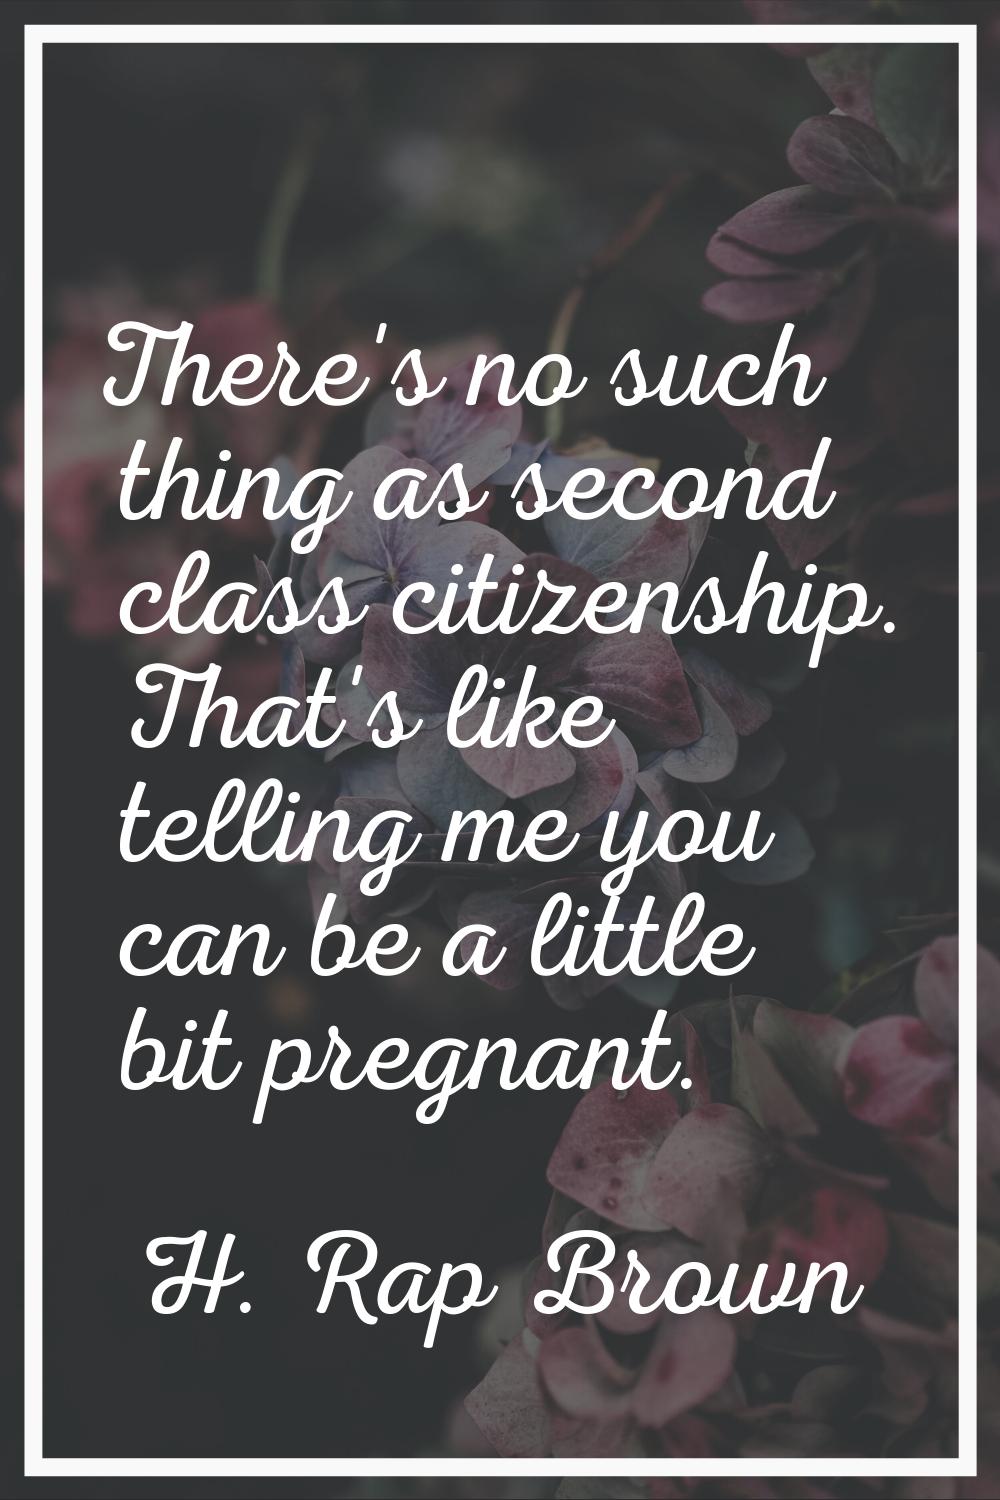 There's no such thing as second class citizenship. That's like telling me you can be a little bit p